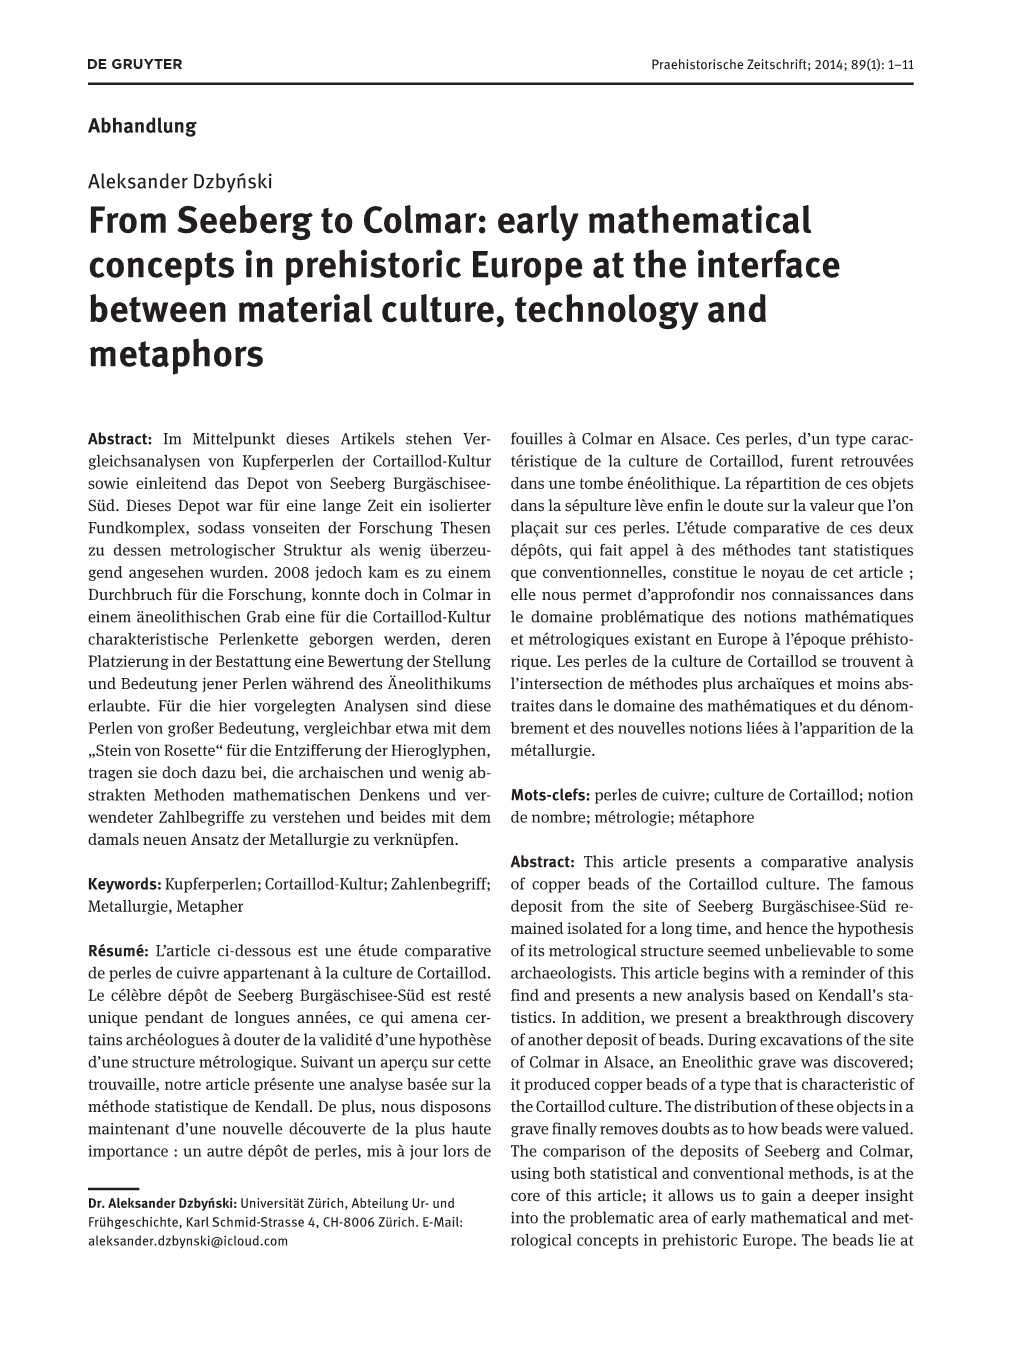 From Seeberg to Colmar: Early Mathematical Concepts in Prehistoric Europe at the Interface Between Material Culture, Technology and Metaphors